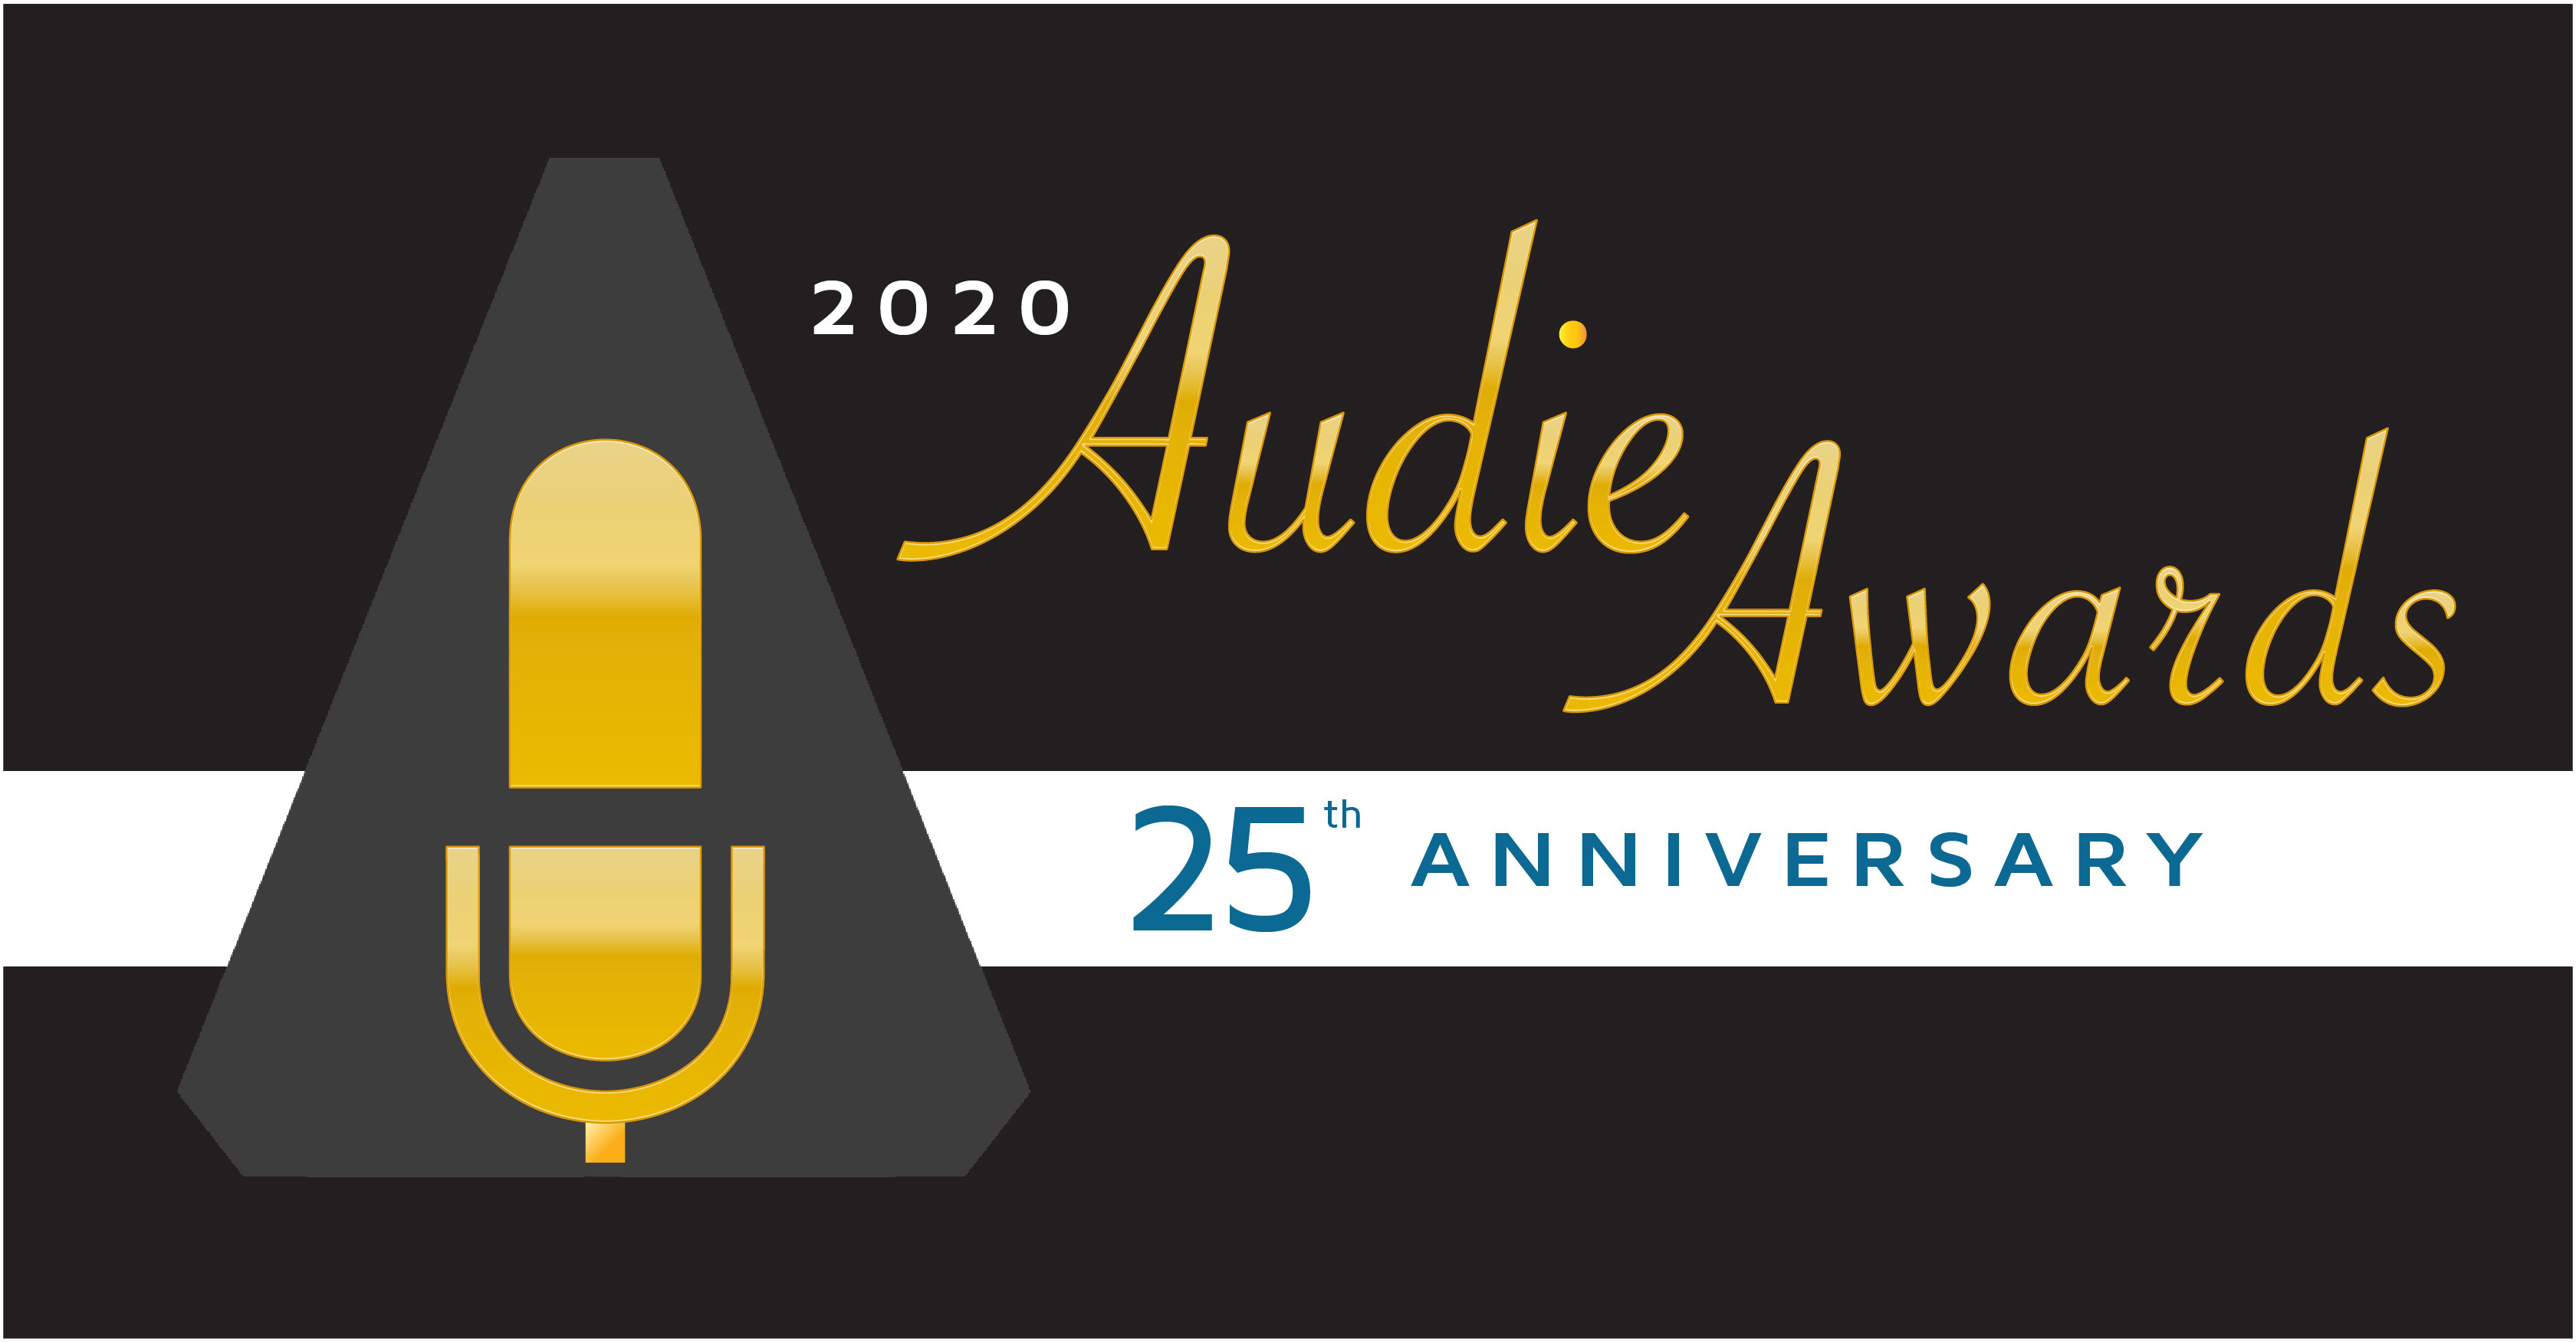 The 2020 Audie Awards® Gala will celebrate the Awards' 25th Anniversary on March 2.